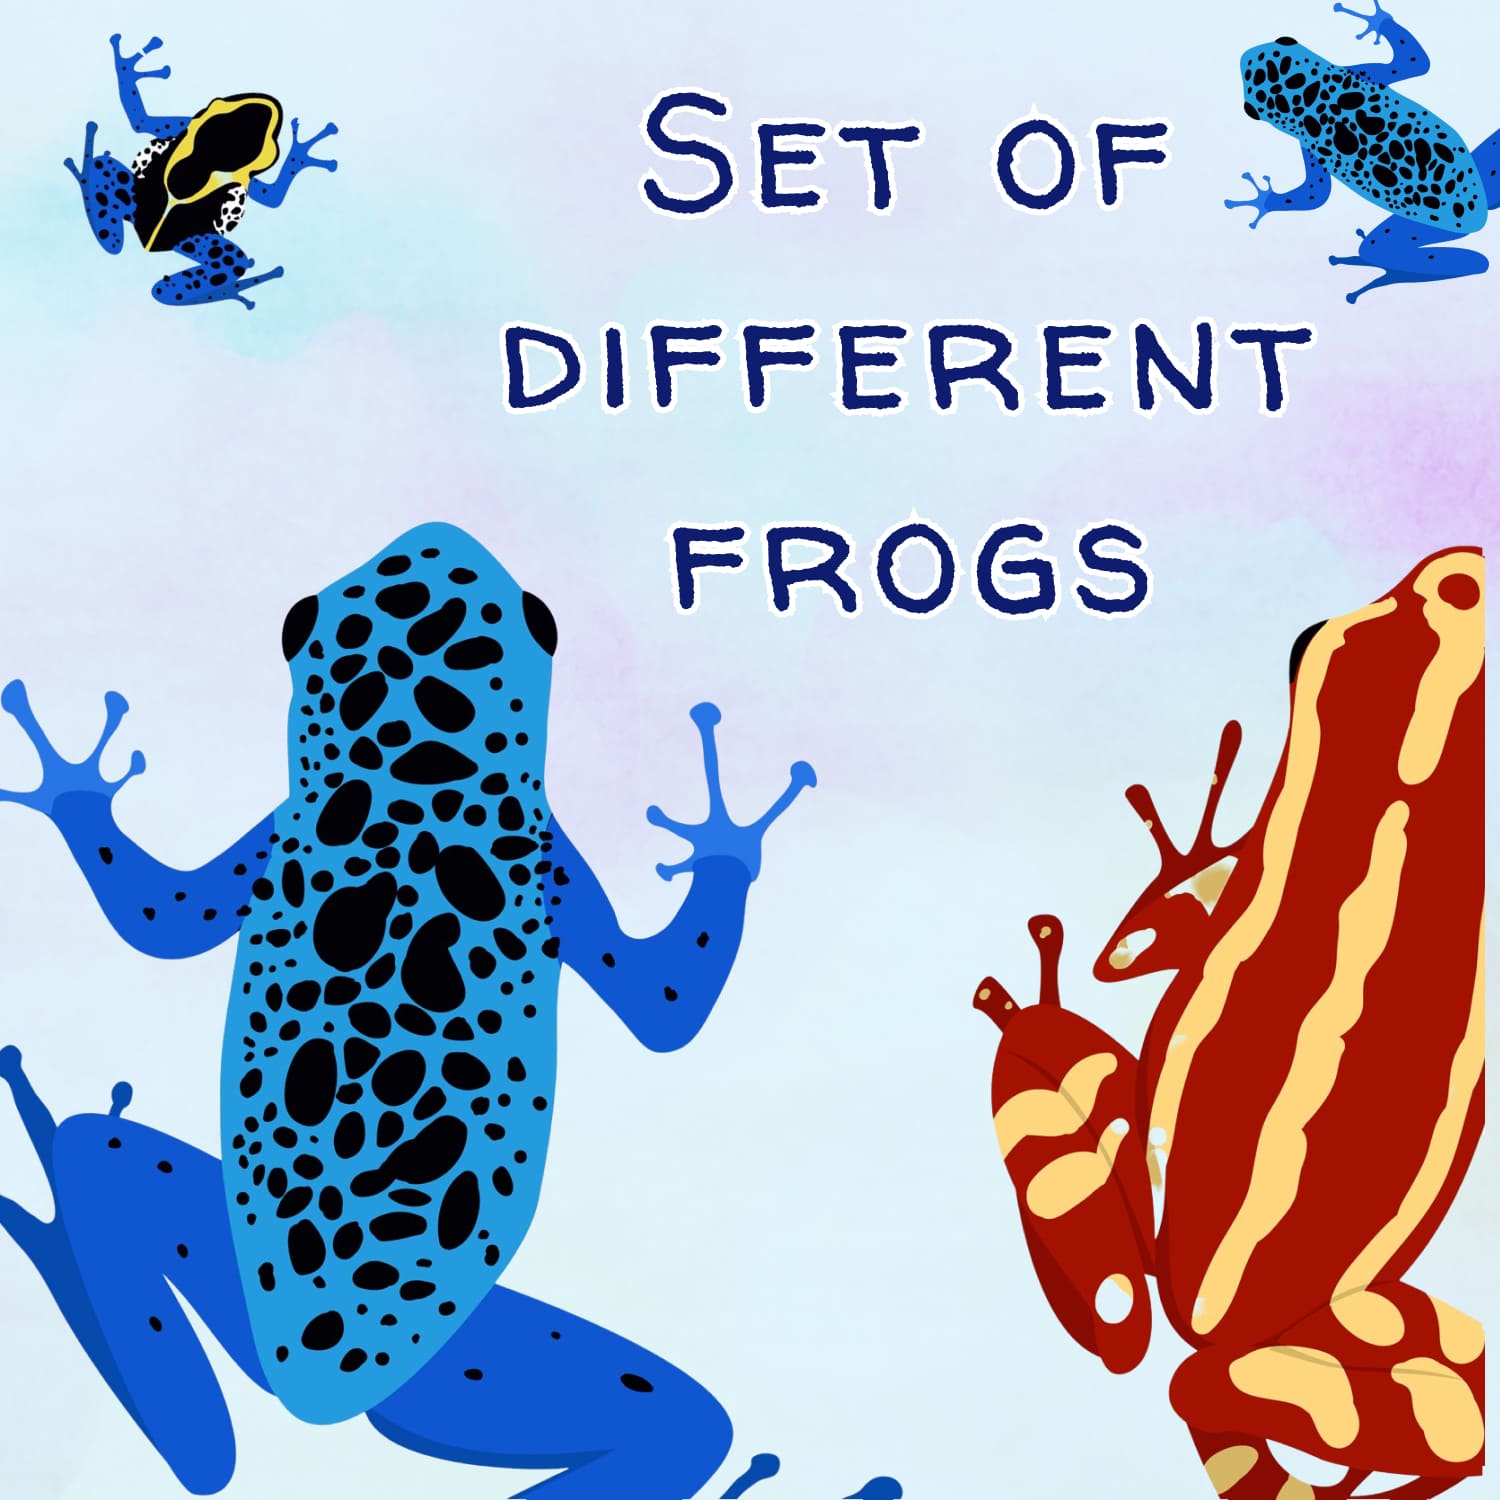 Vector illustration of frogs on a white background.